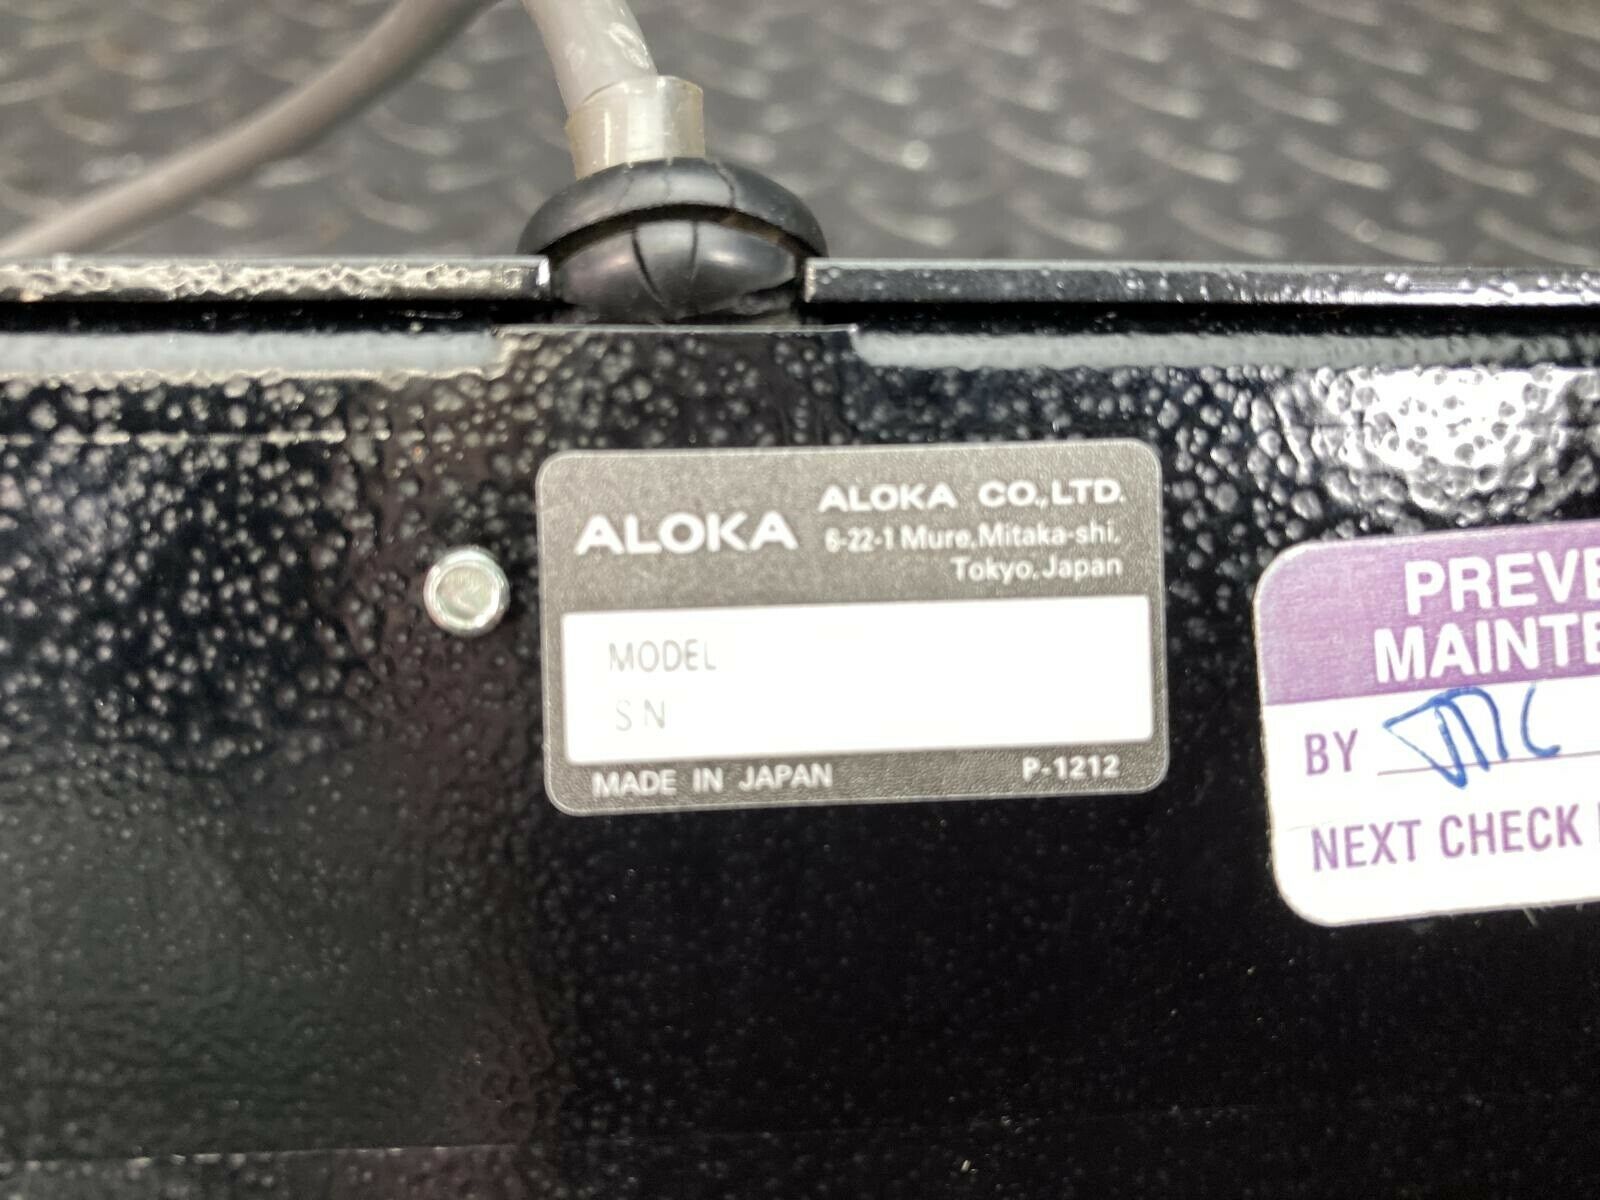 Aloka Ultrasound Foot Switch DIAGNOSTIC ULTRASOUND MACHINES FOR SALE